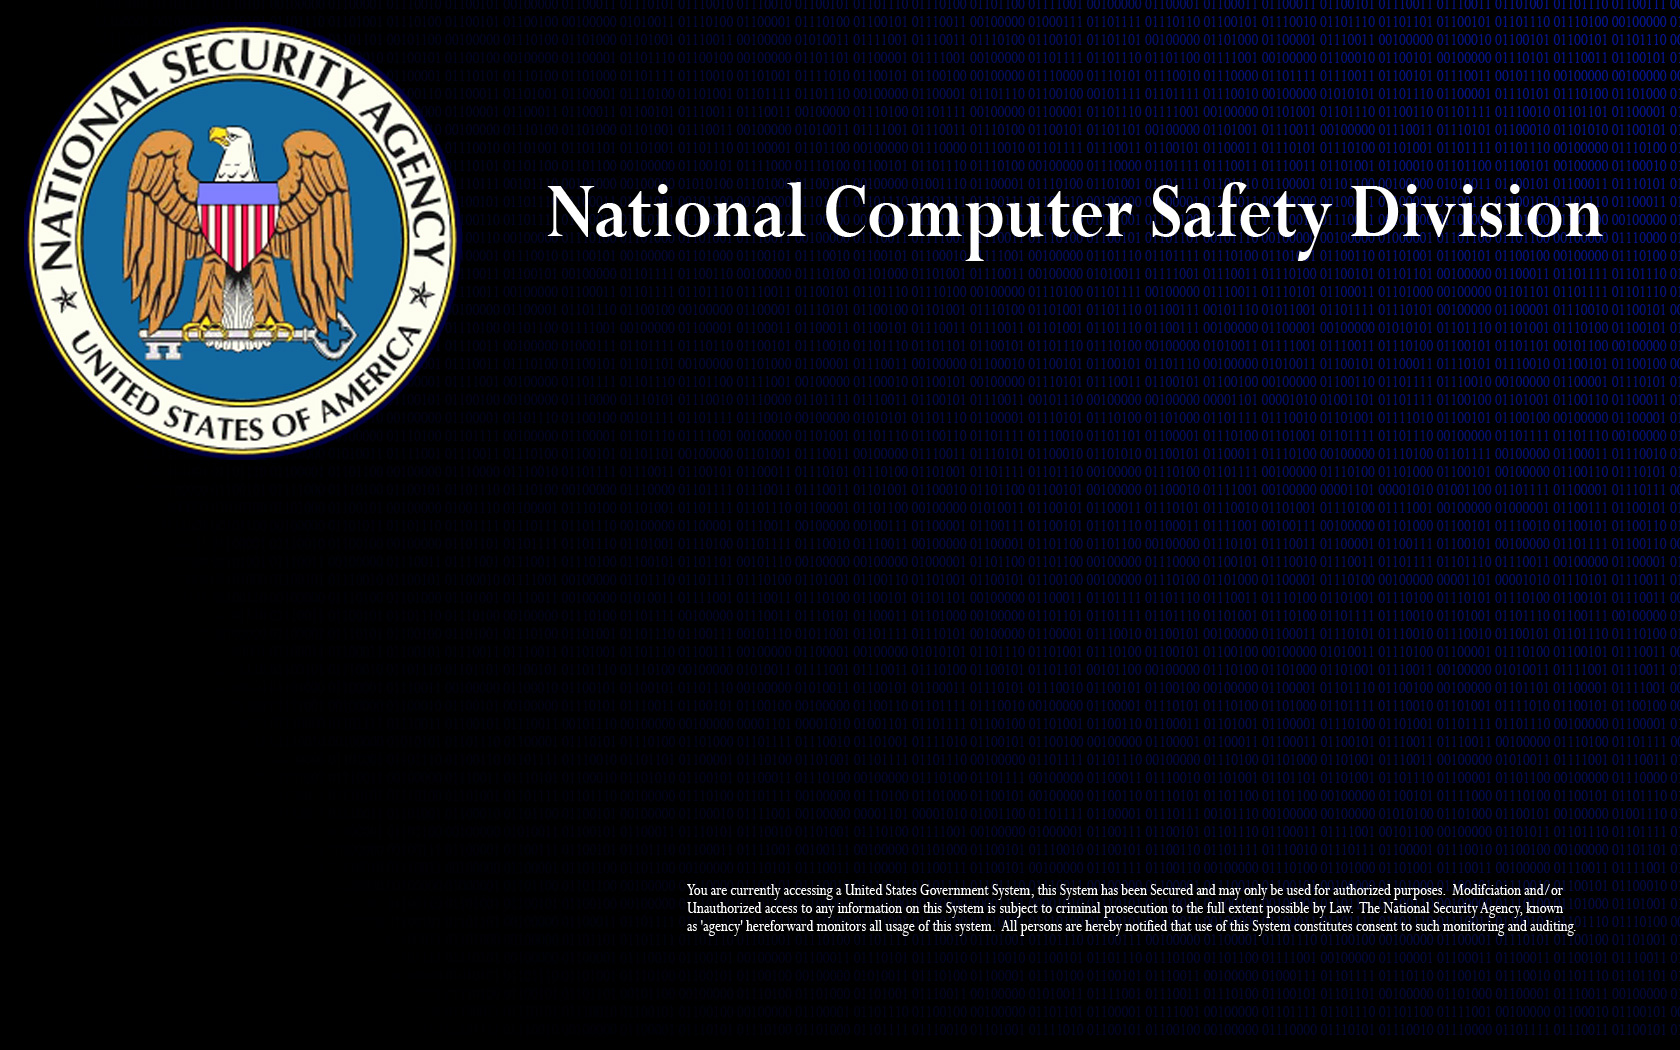 NSA Background by nKrypteD1 on